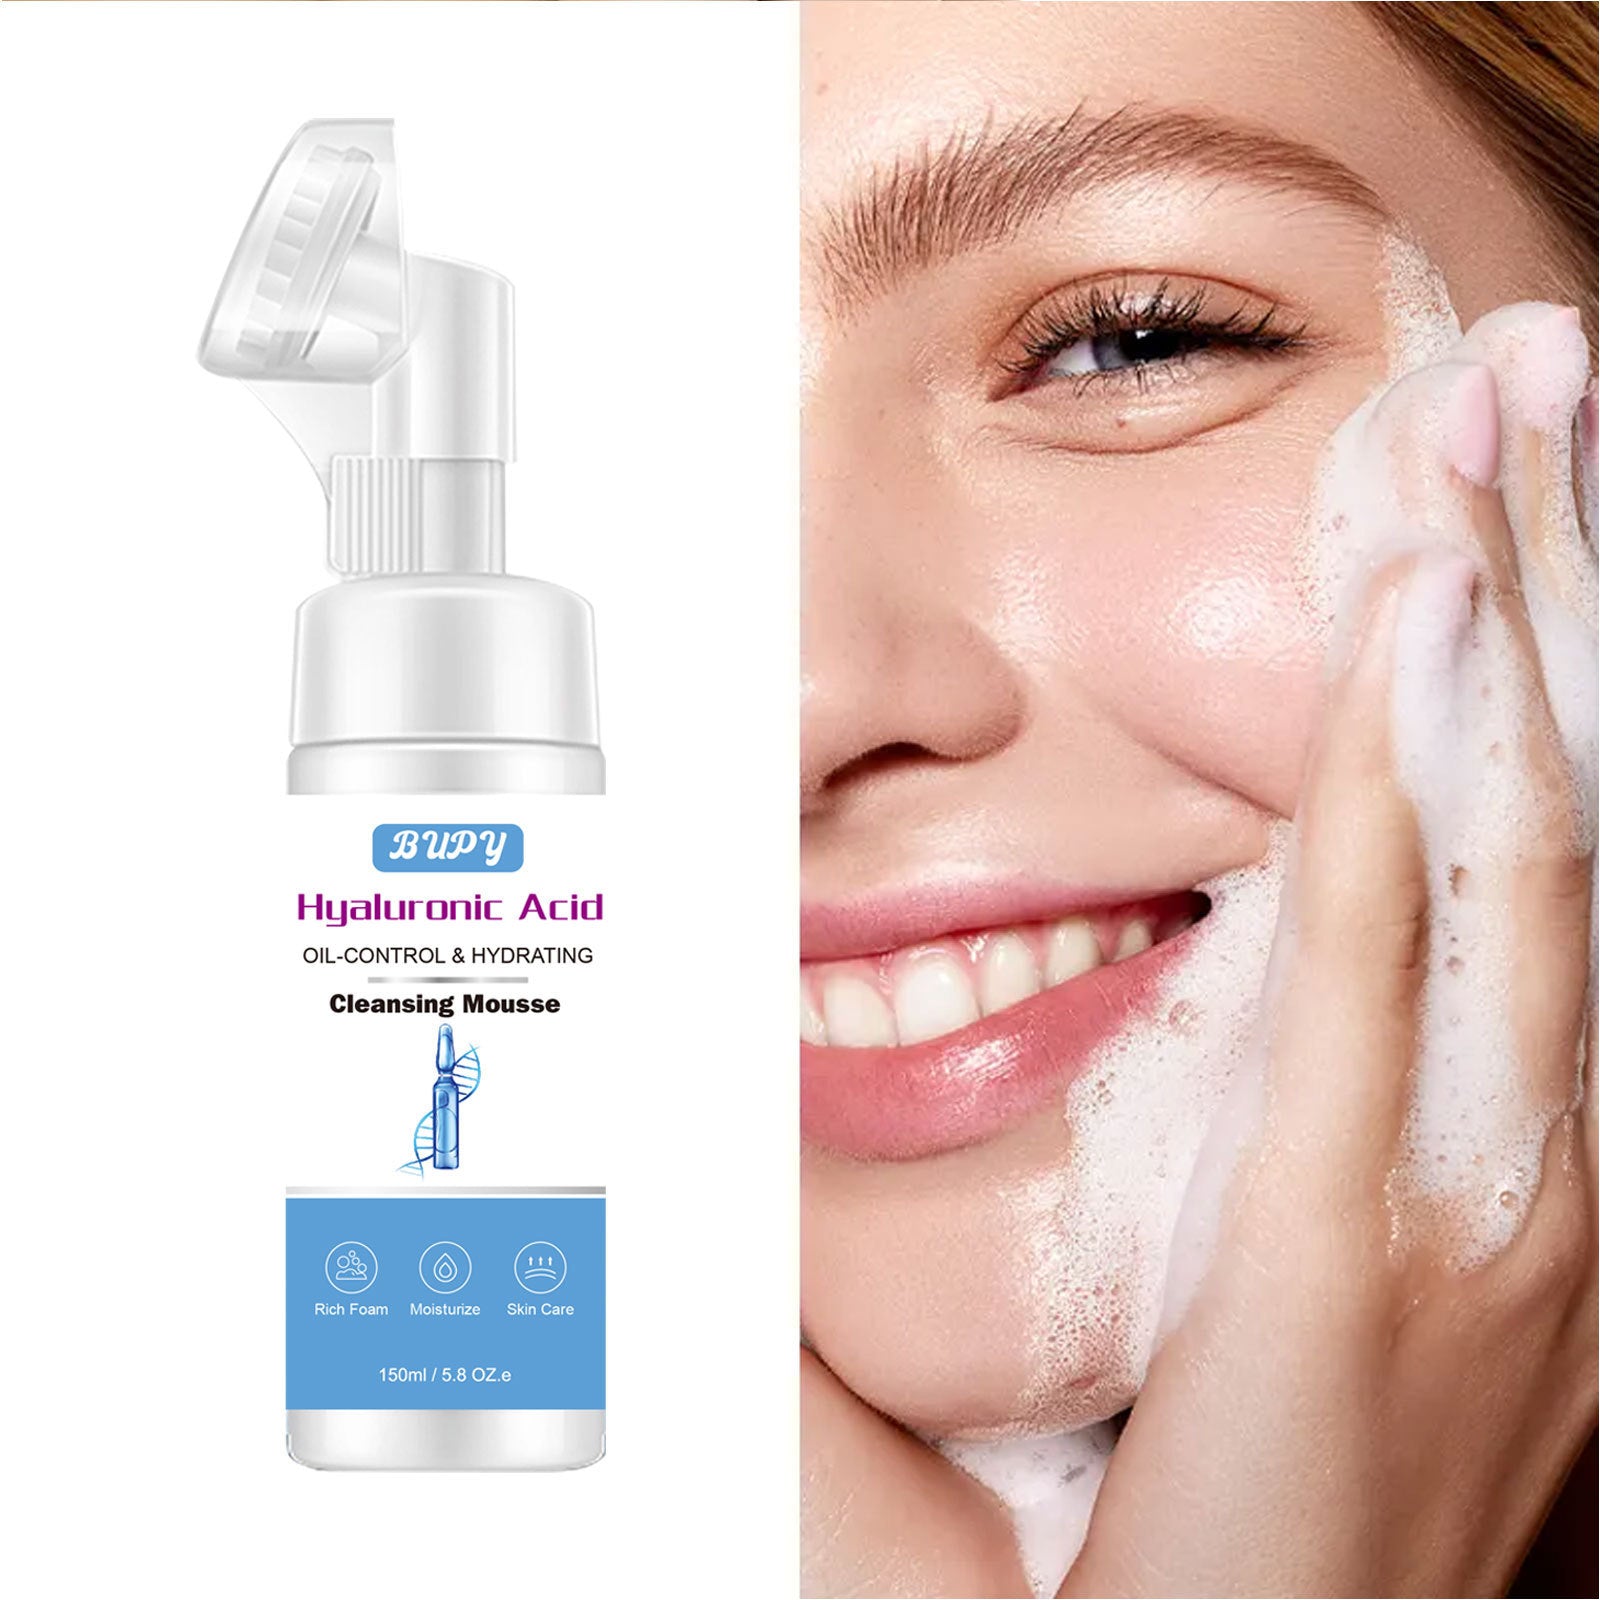 Wholesale Hyaluronic Acid Mousse Cleansing, Foam Facial Cleanser, Makeup Removal, Oil Control, Moisturizing 325